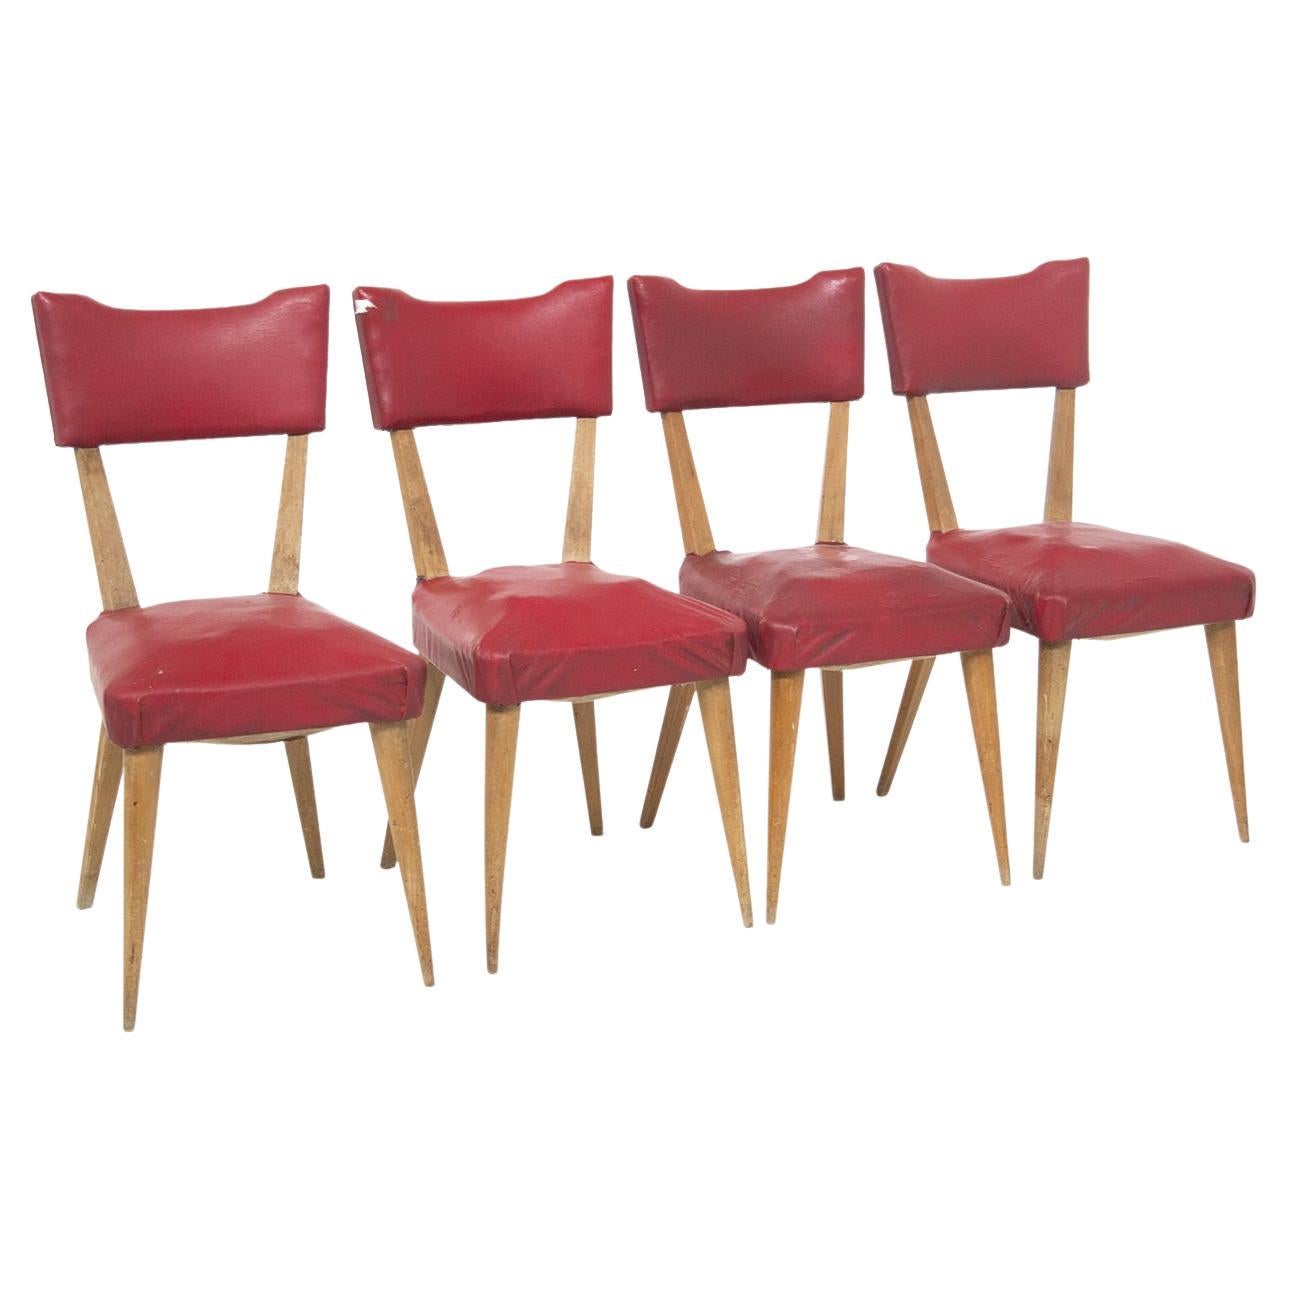 Four Vintage Chairs of French Manufacture